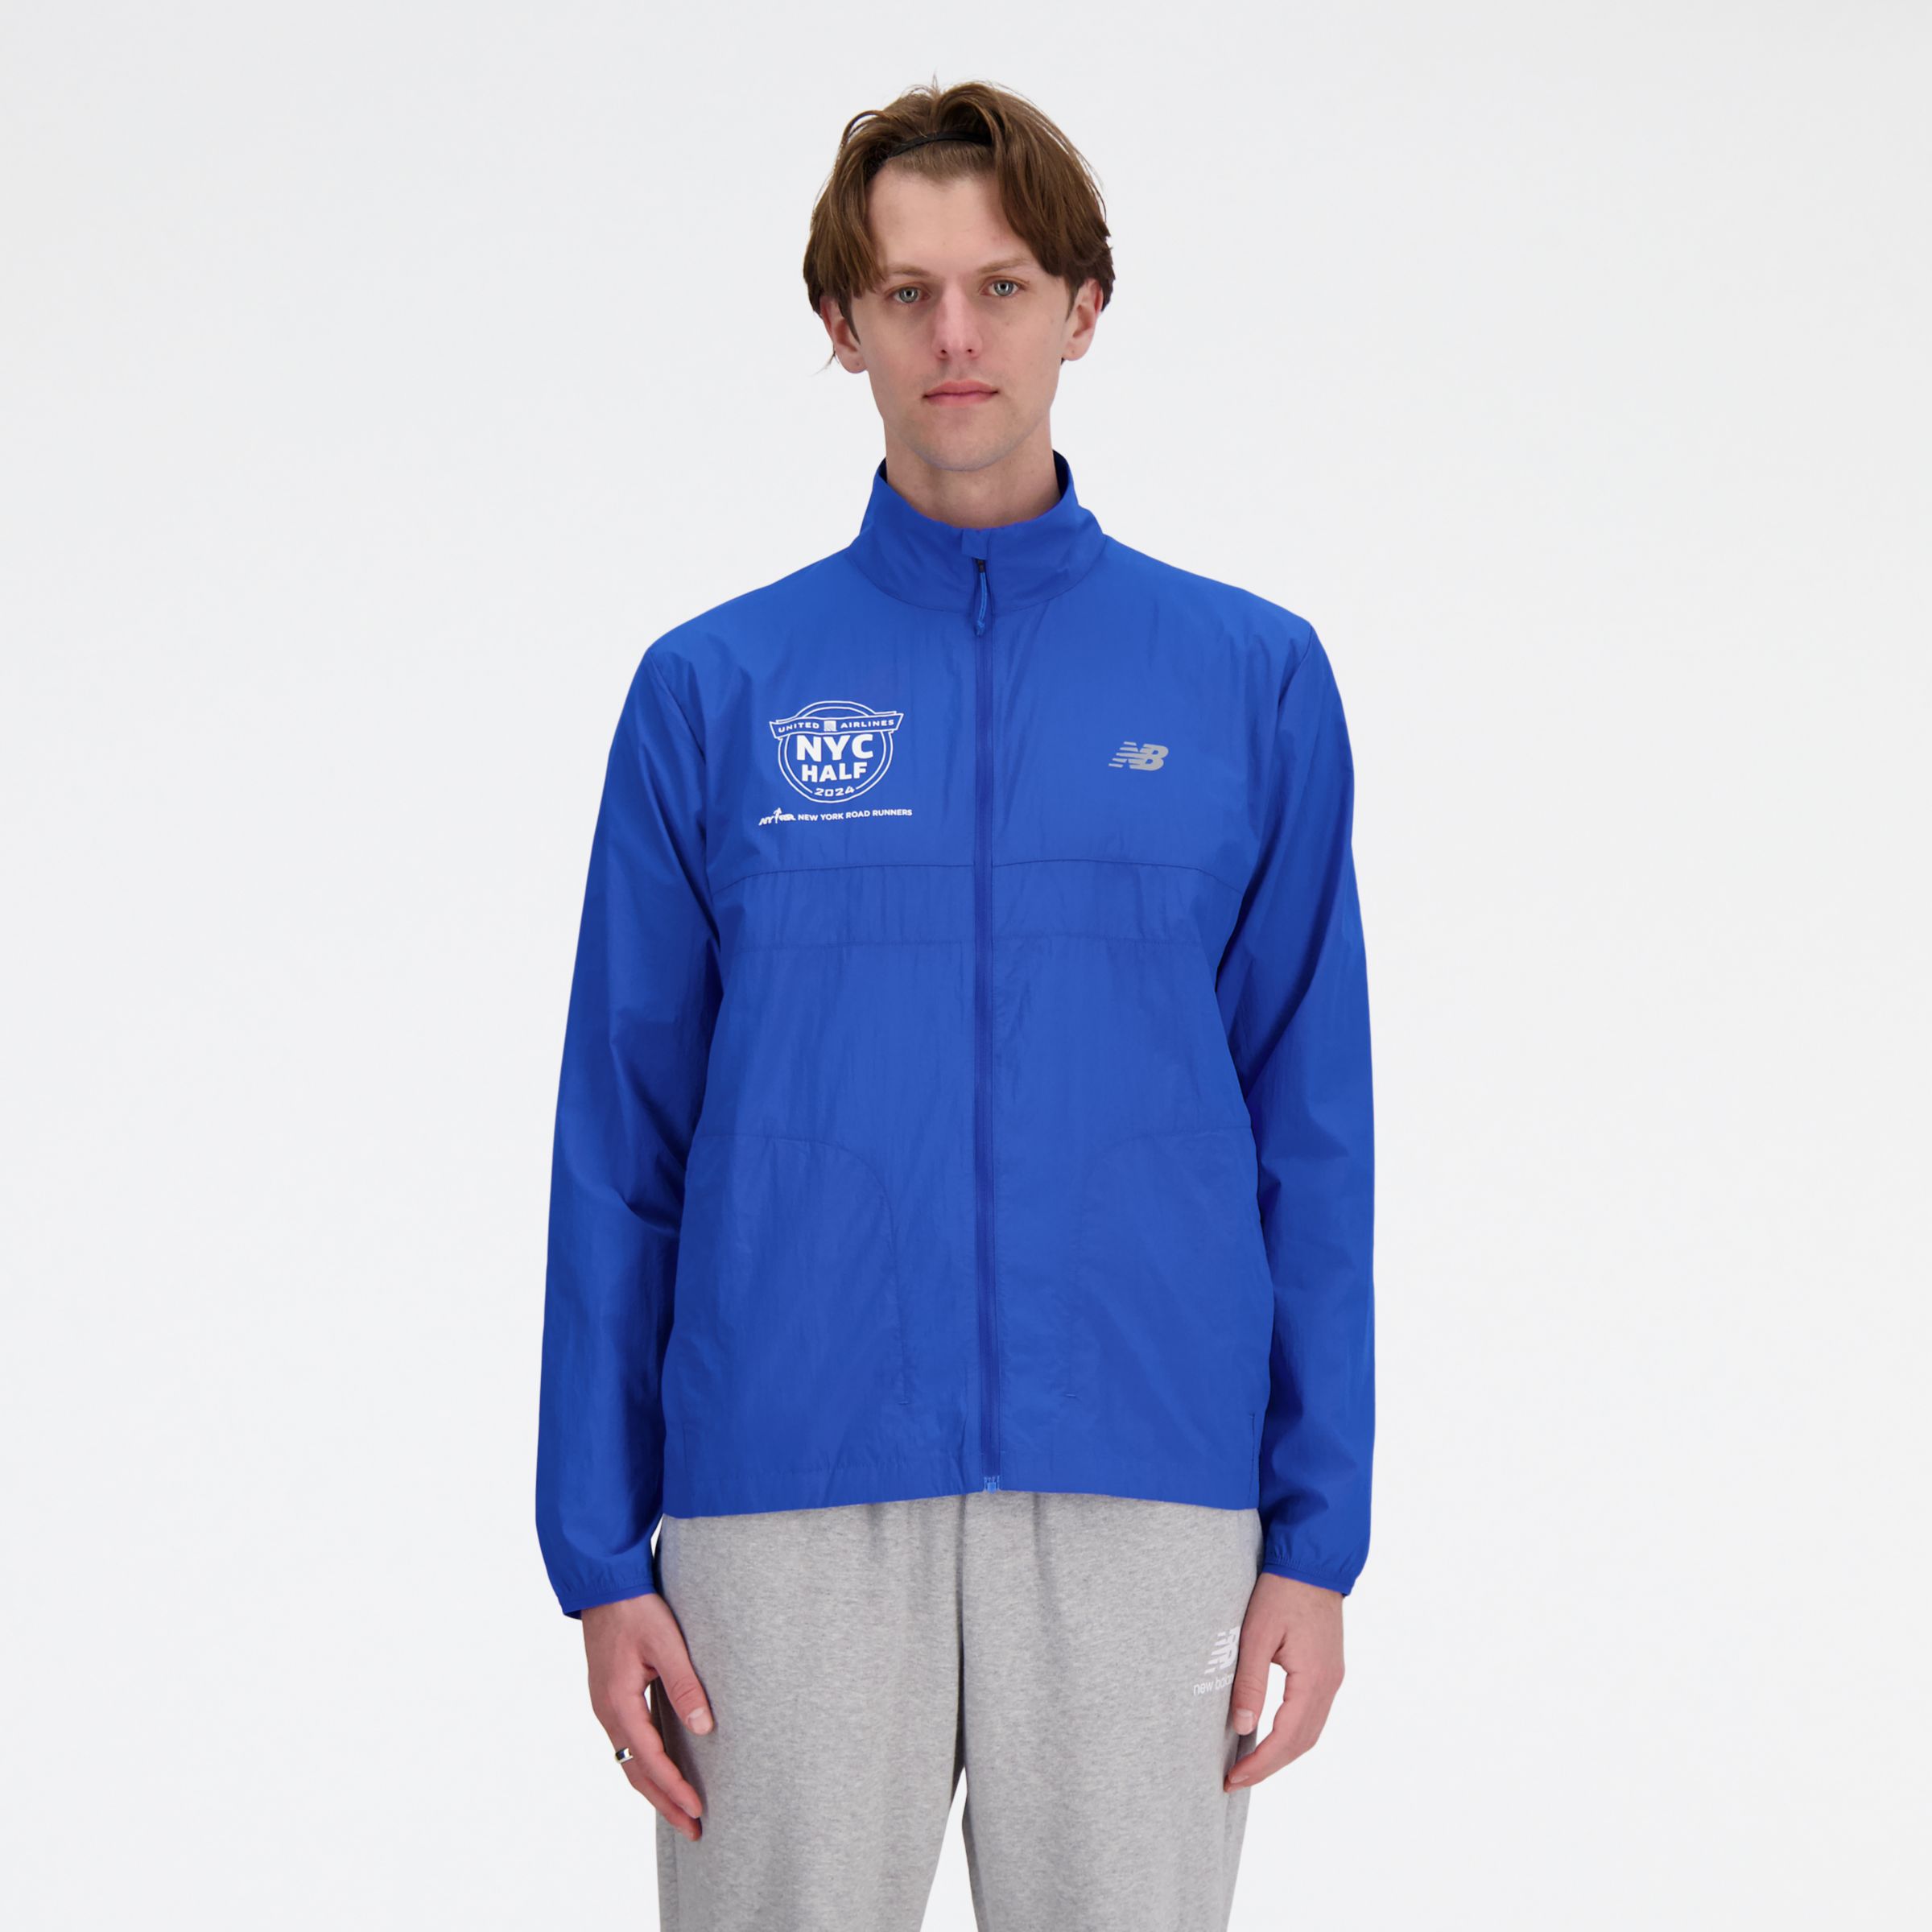 United Airlines NYC Half Athletics Packable Jacket